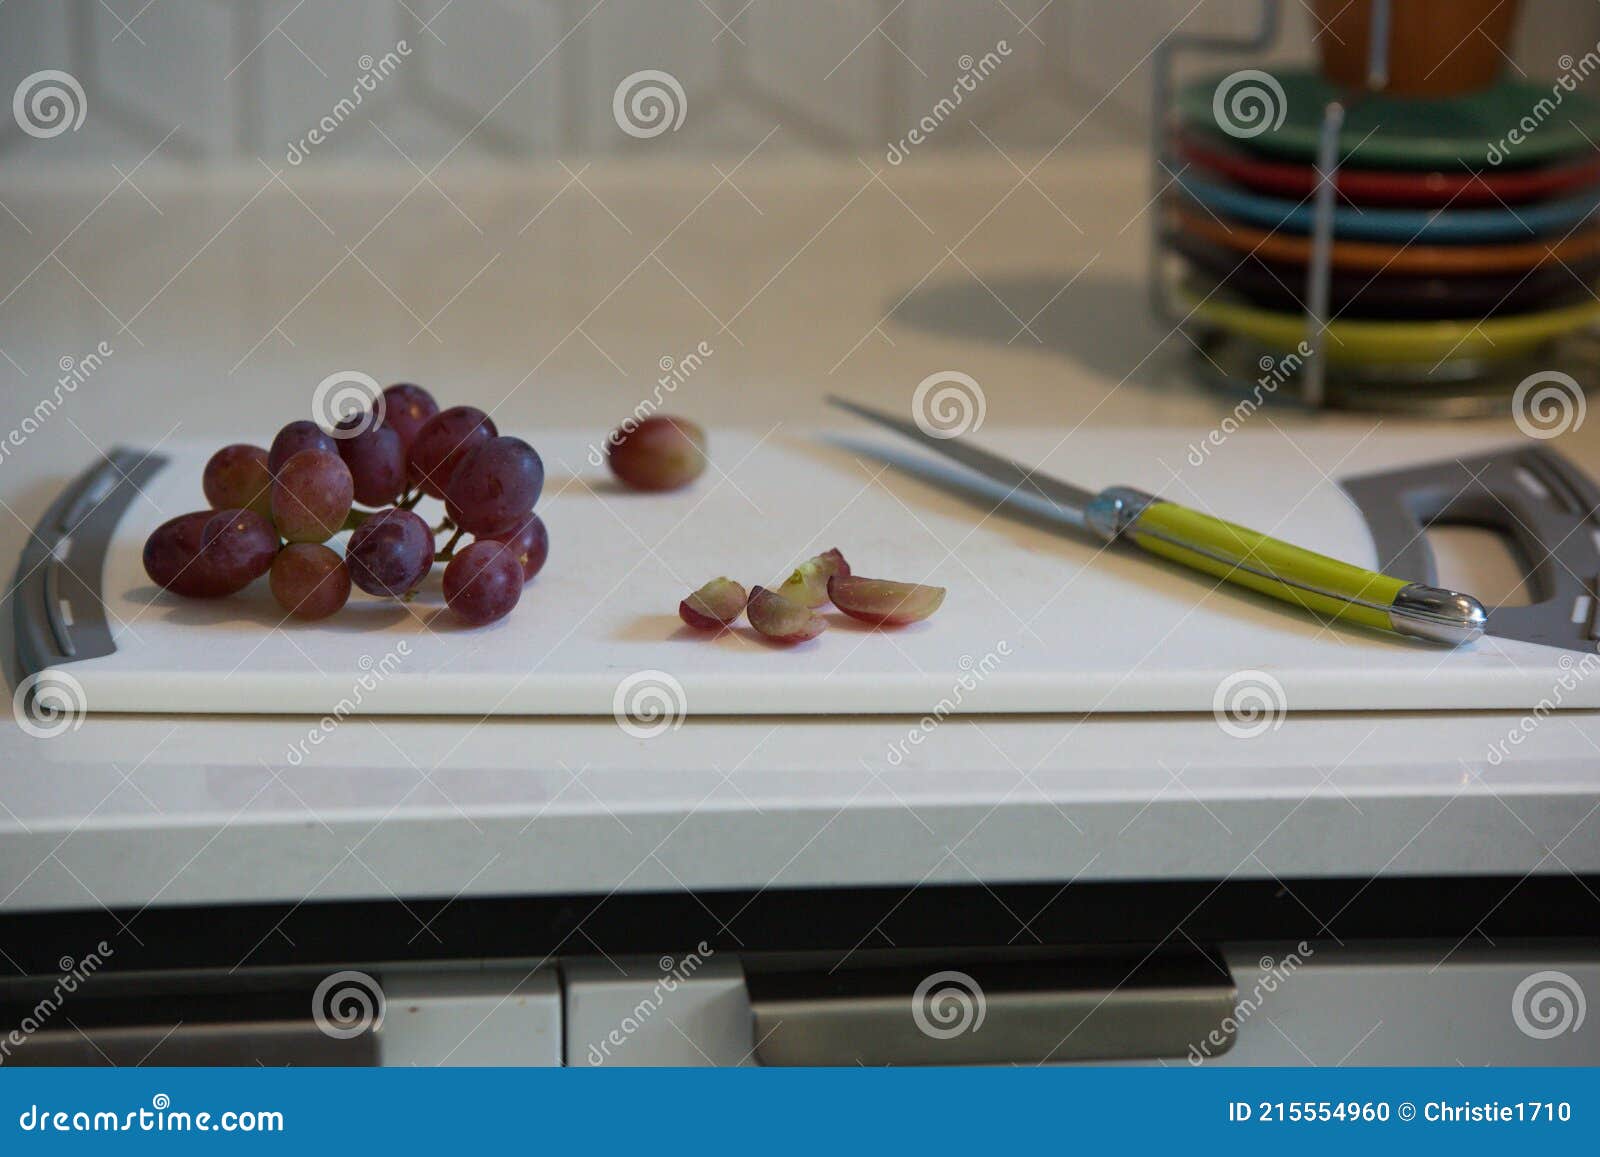 https://thumbs.dreamstime.com/z/grapes-cut-quarters-to-prevent-choking-knife-chopping-board-close-up-image-bunch-red-white-kitchen-215554960.jpg